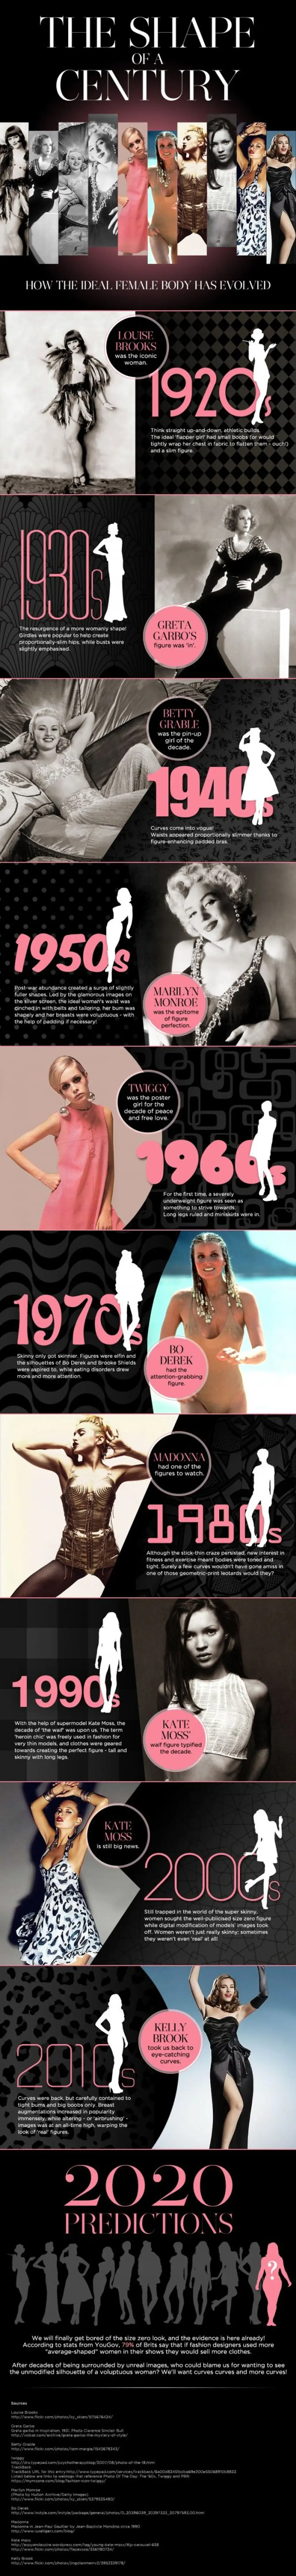 Let's Kick off with How Women’s Bodies Have Evolved